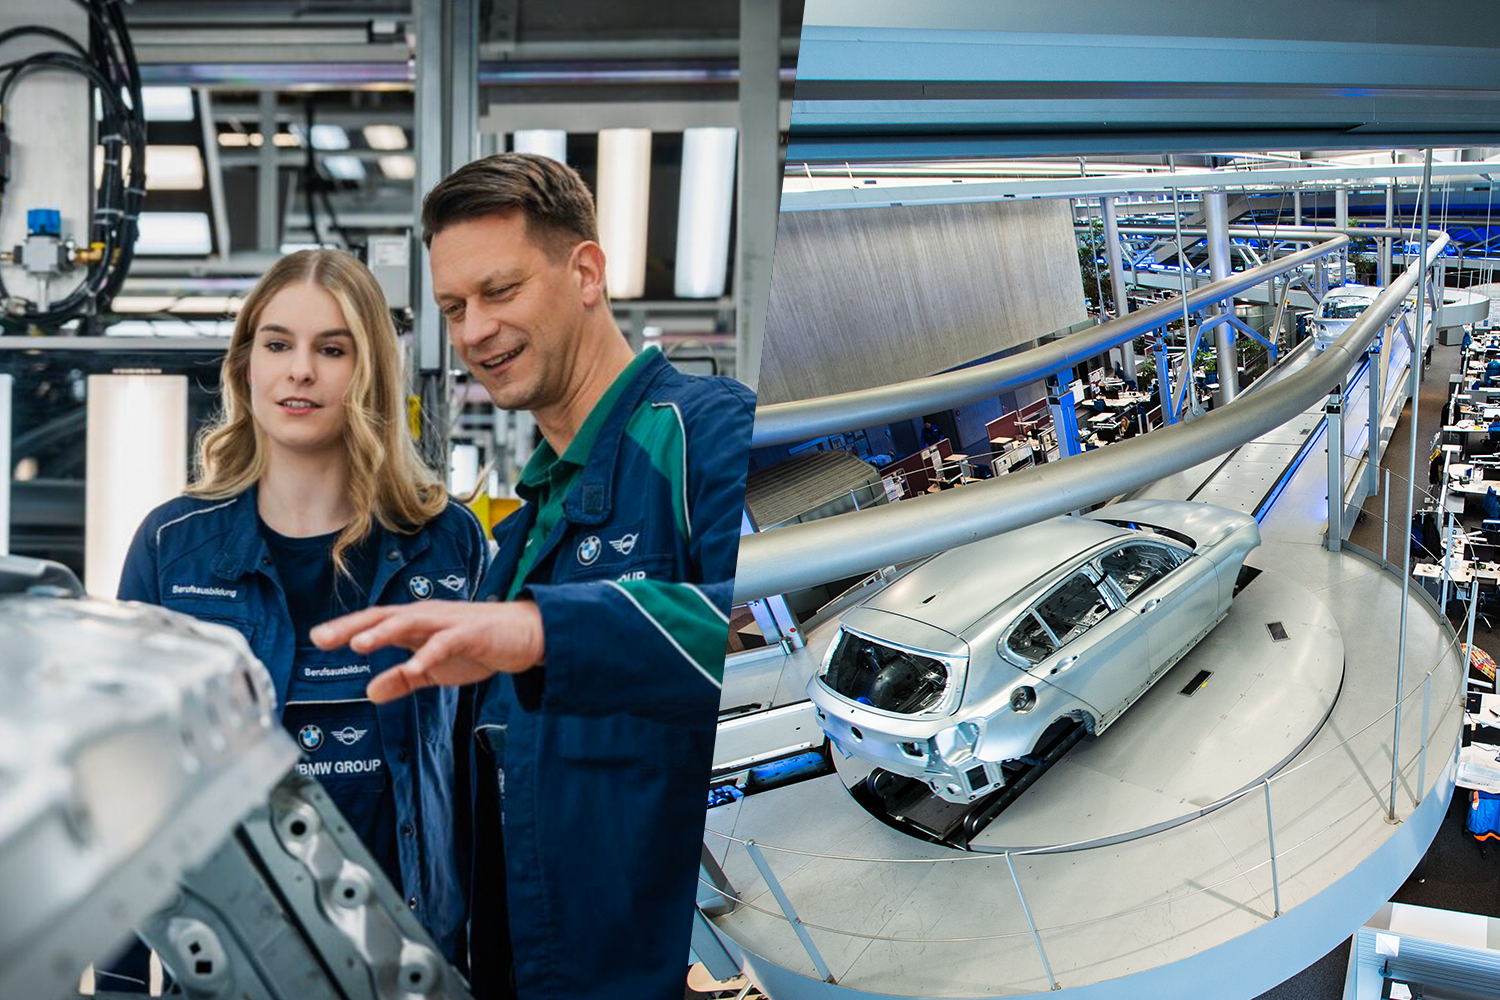 Apprentice with trainer and interior view of the central building at the BMW plant in Leipzig